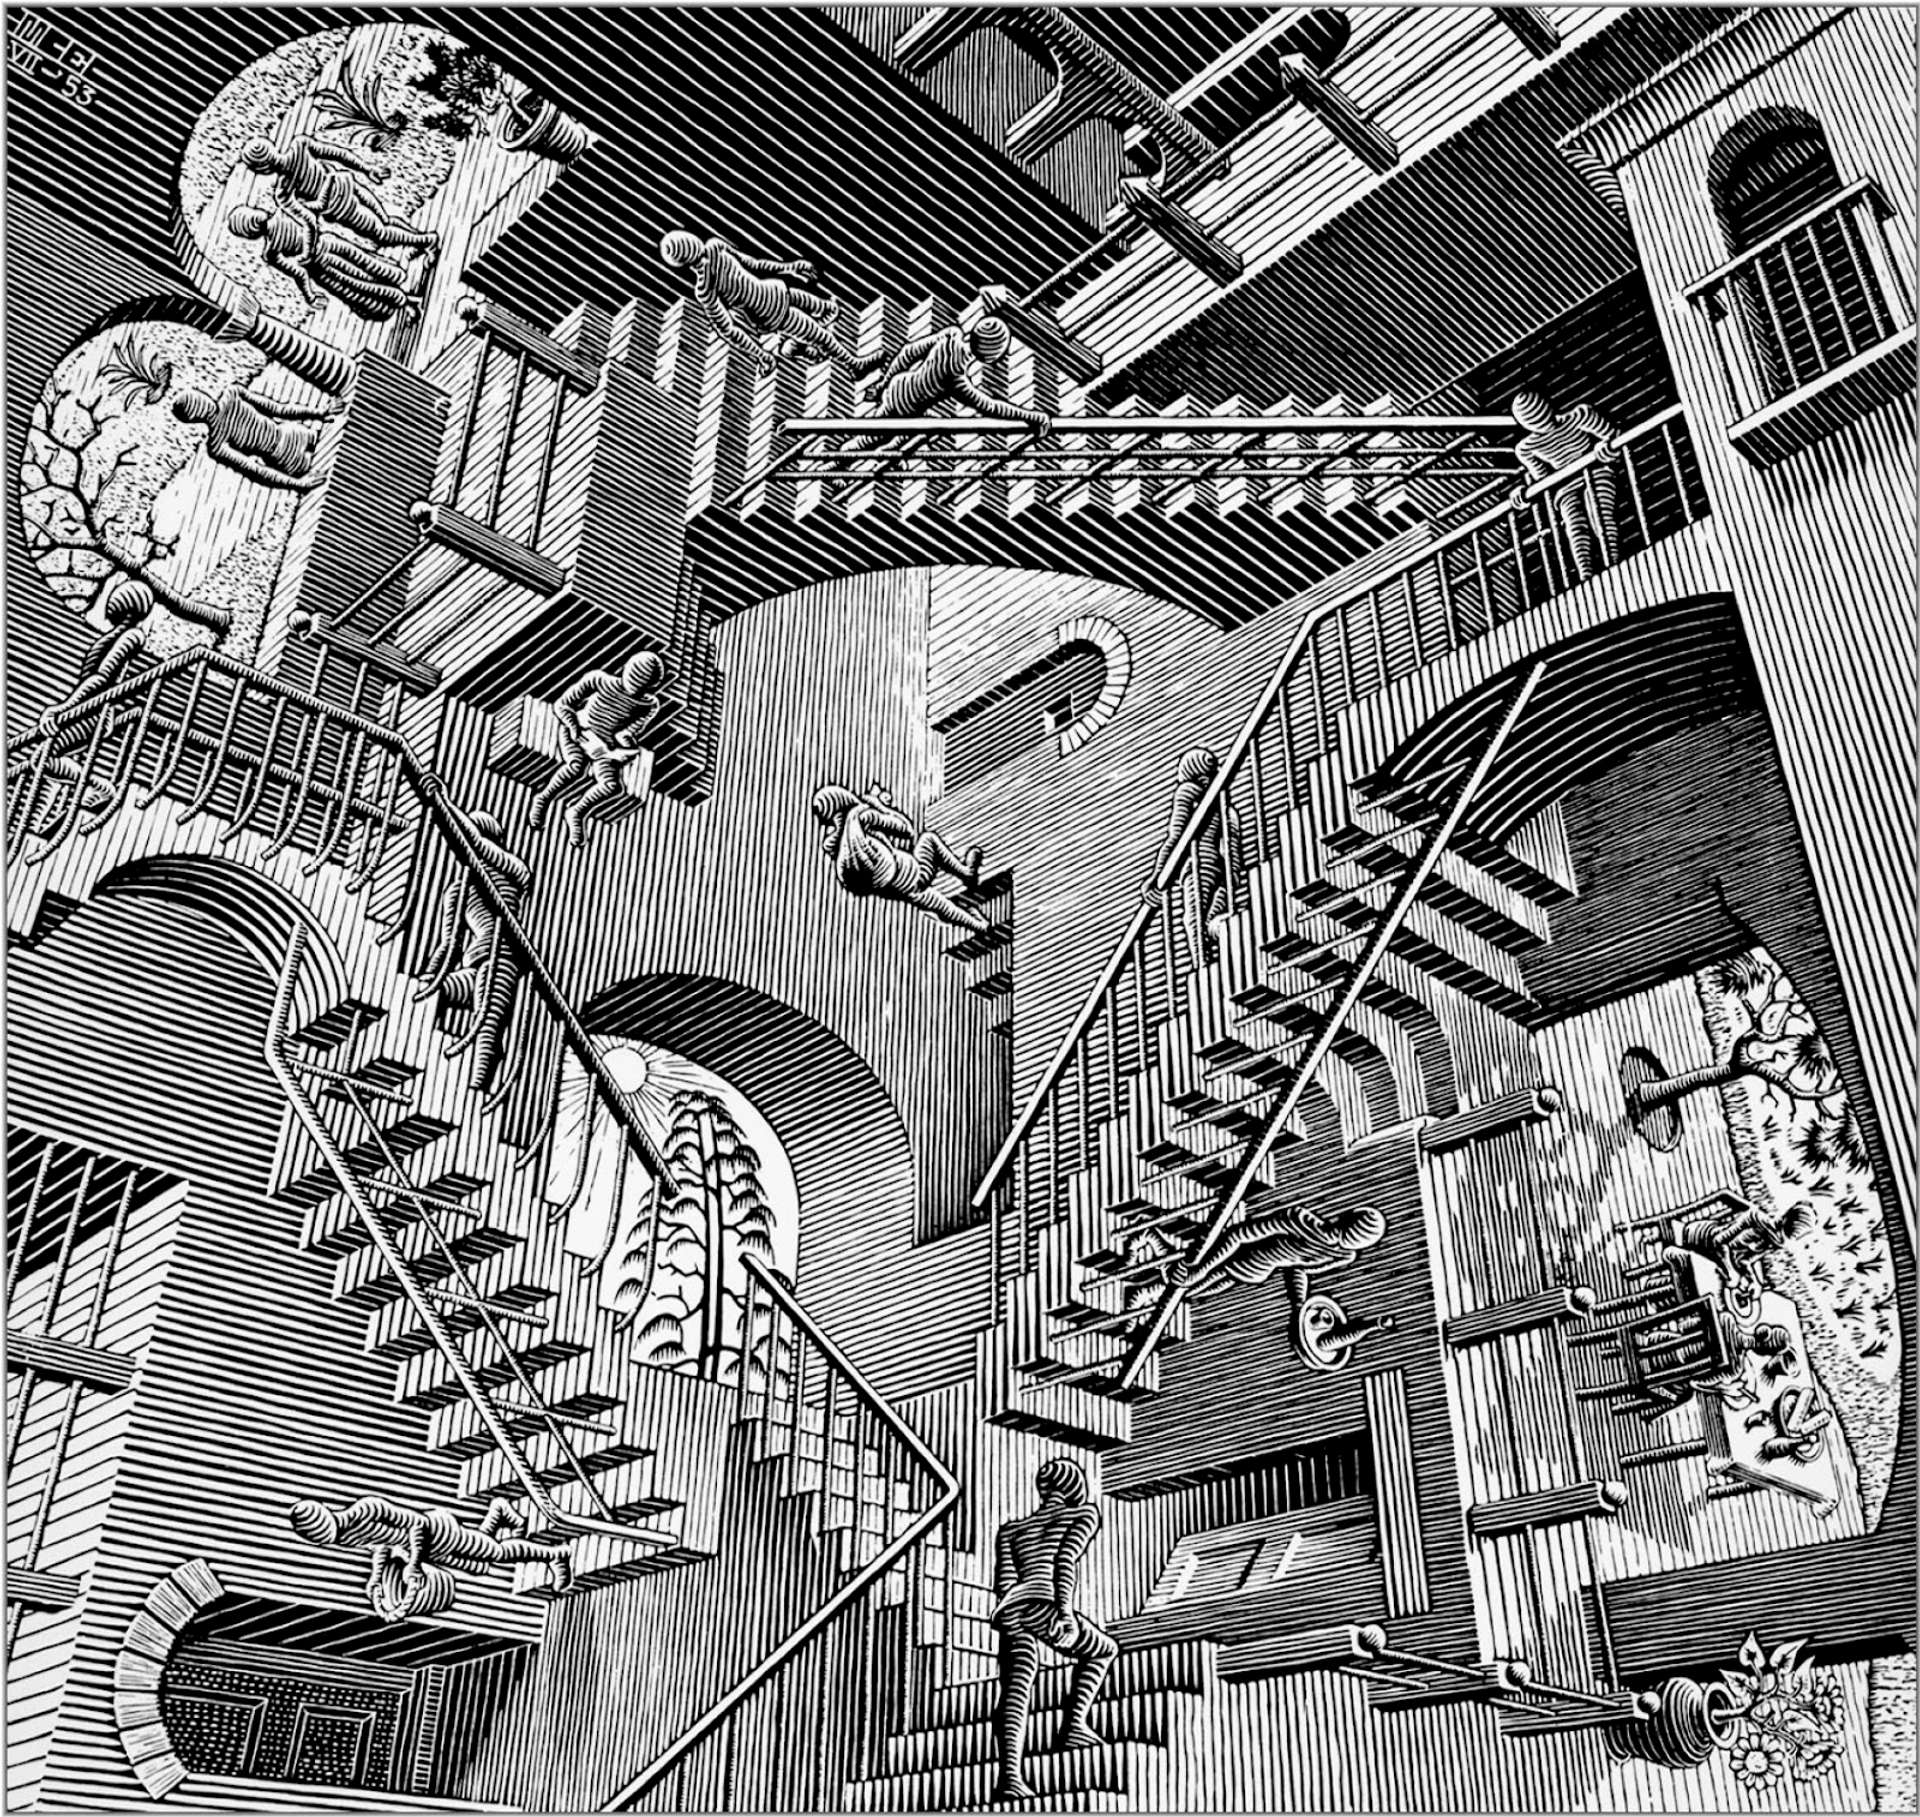 A lithograph print titled "Relativity" by M.C. Escher, 1953, featuring a complex, three-dimensional architectural structure composed of staircases, platforms, and doorways, inhabited by faceless figures in long robes. The structure appears to defy the laws of gravity and perspective, with staircases leading both up and down, and figures moving in different directions.